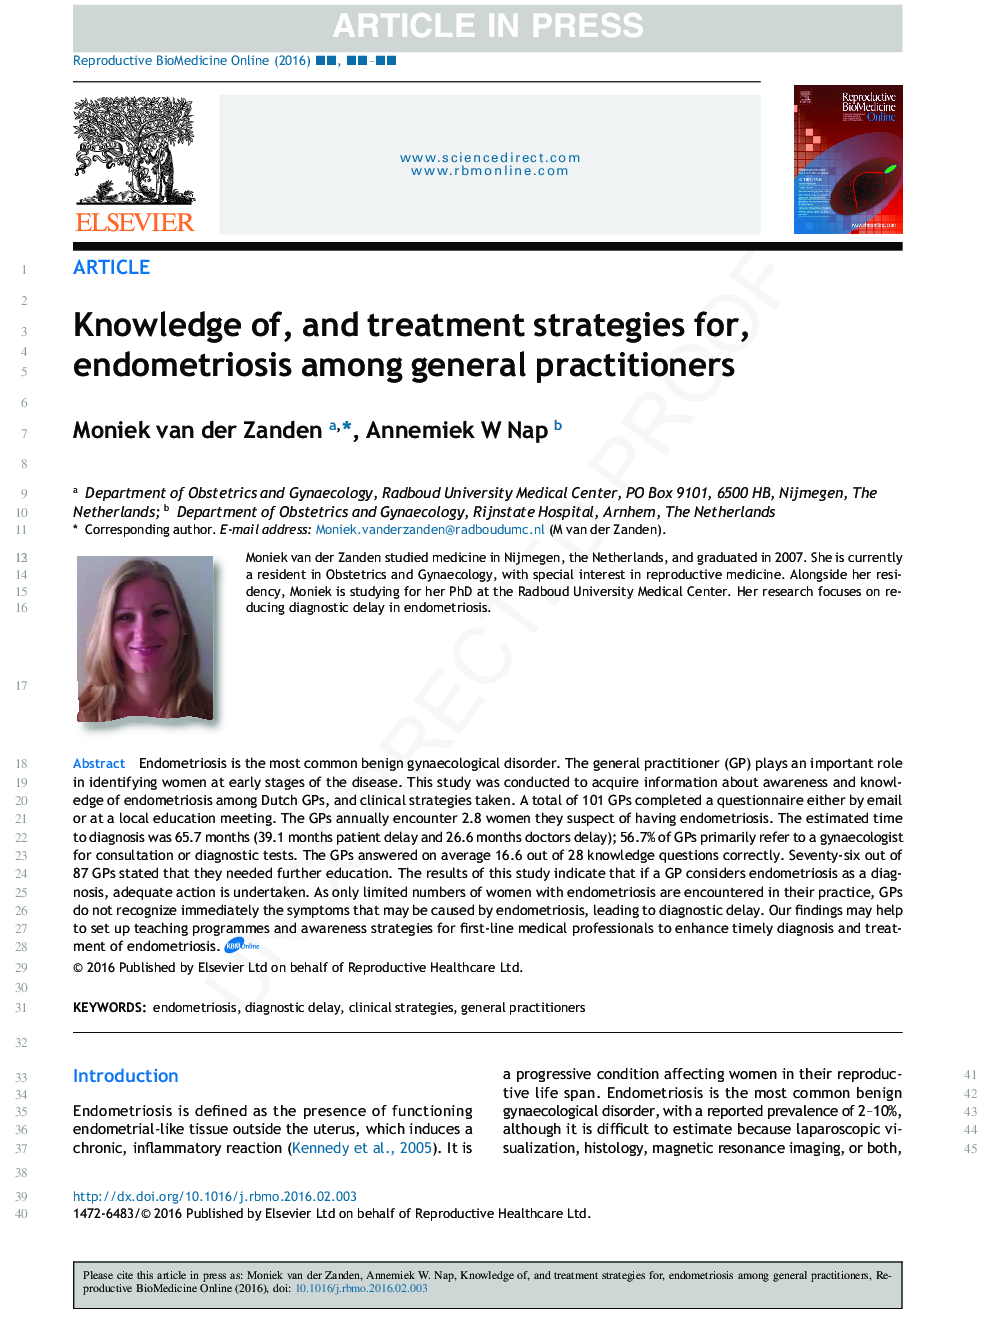 Knowledge of, and treatment strategies for, endometriosis among general practitioners